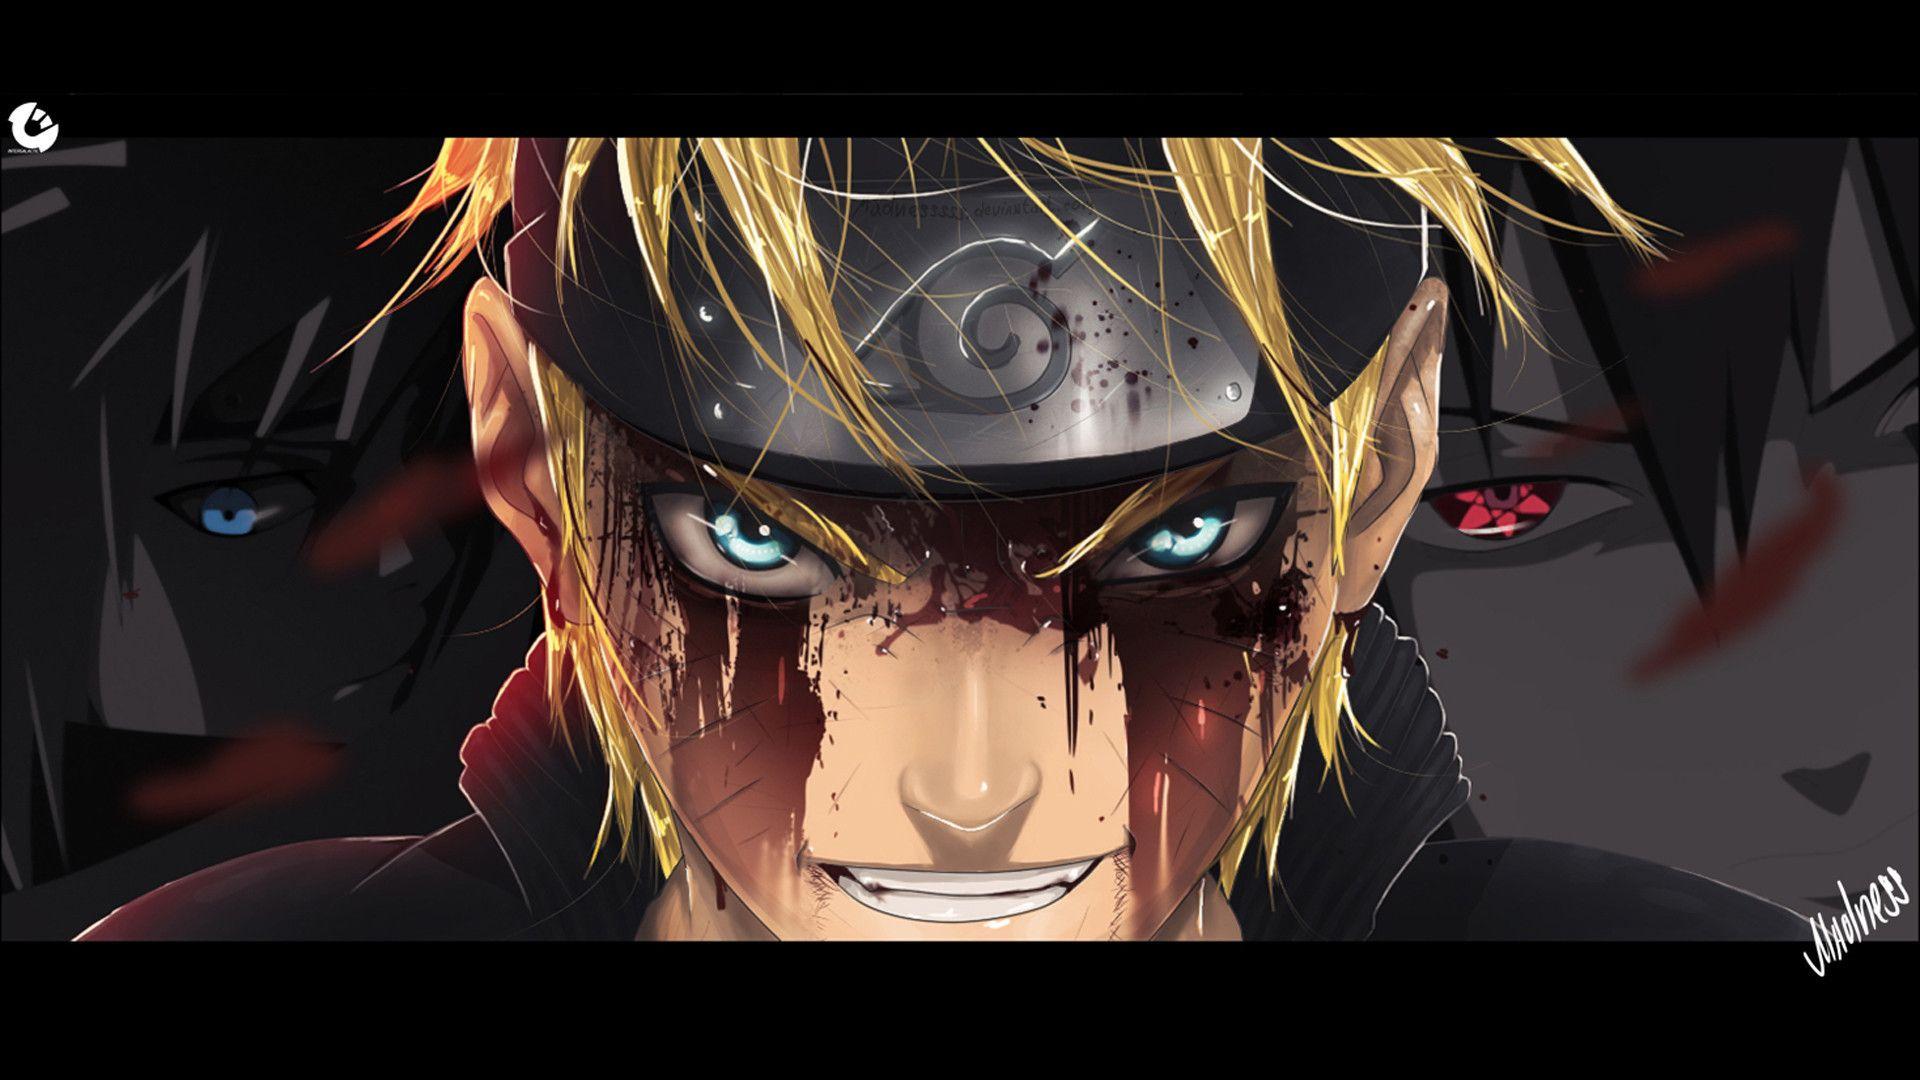 Download Feel the power of the ninja in the classic PS4 game Naruto  Wallpaper  Wallpaperscom